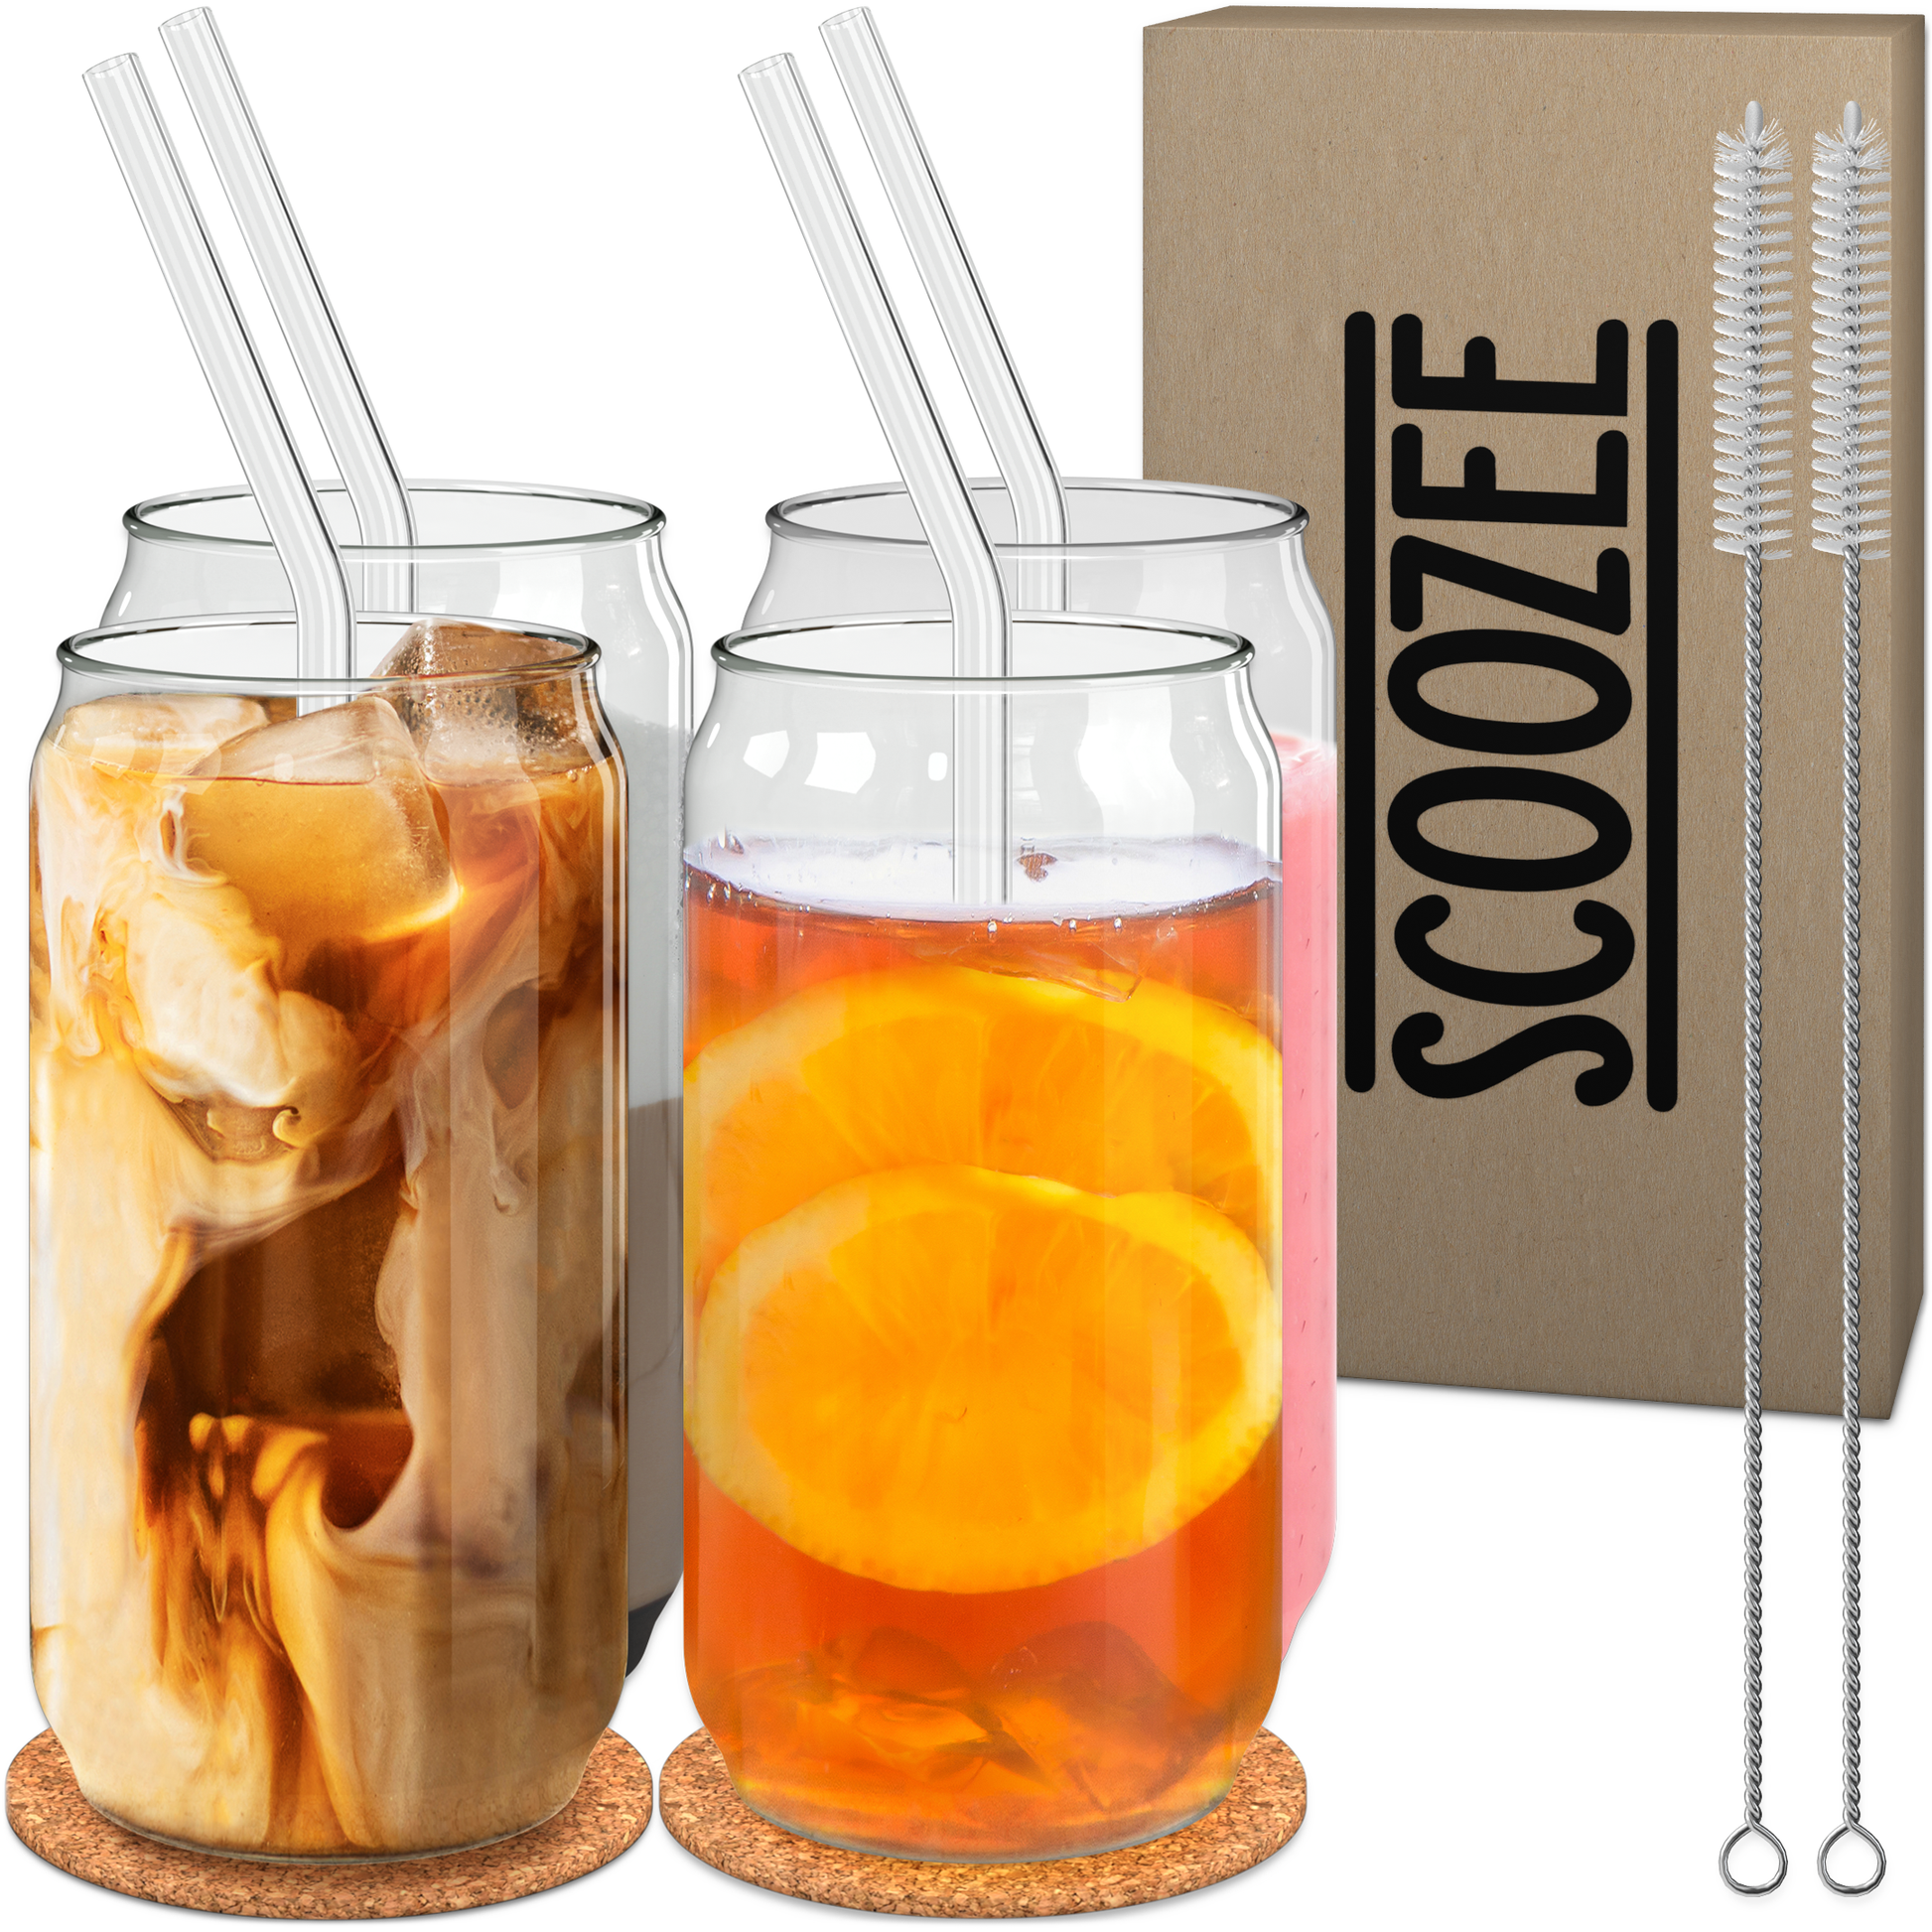 Scoozee Drinking Glasses with Glass Straws - 16 oz, Set of 4